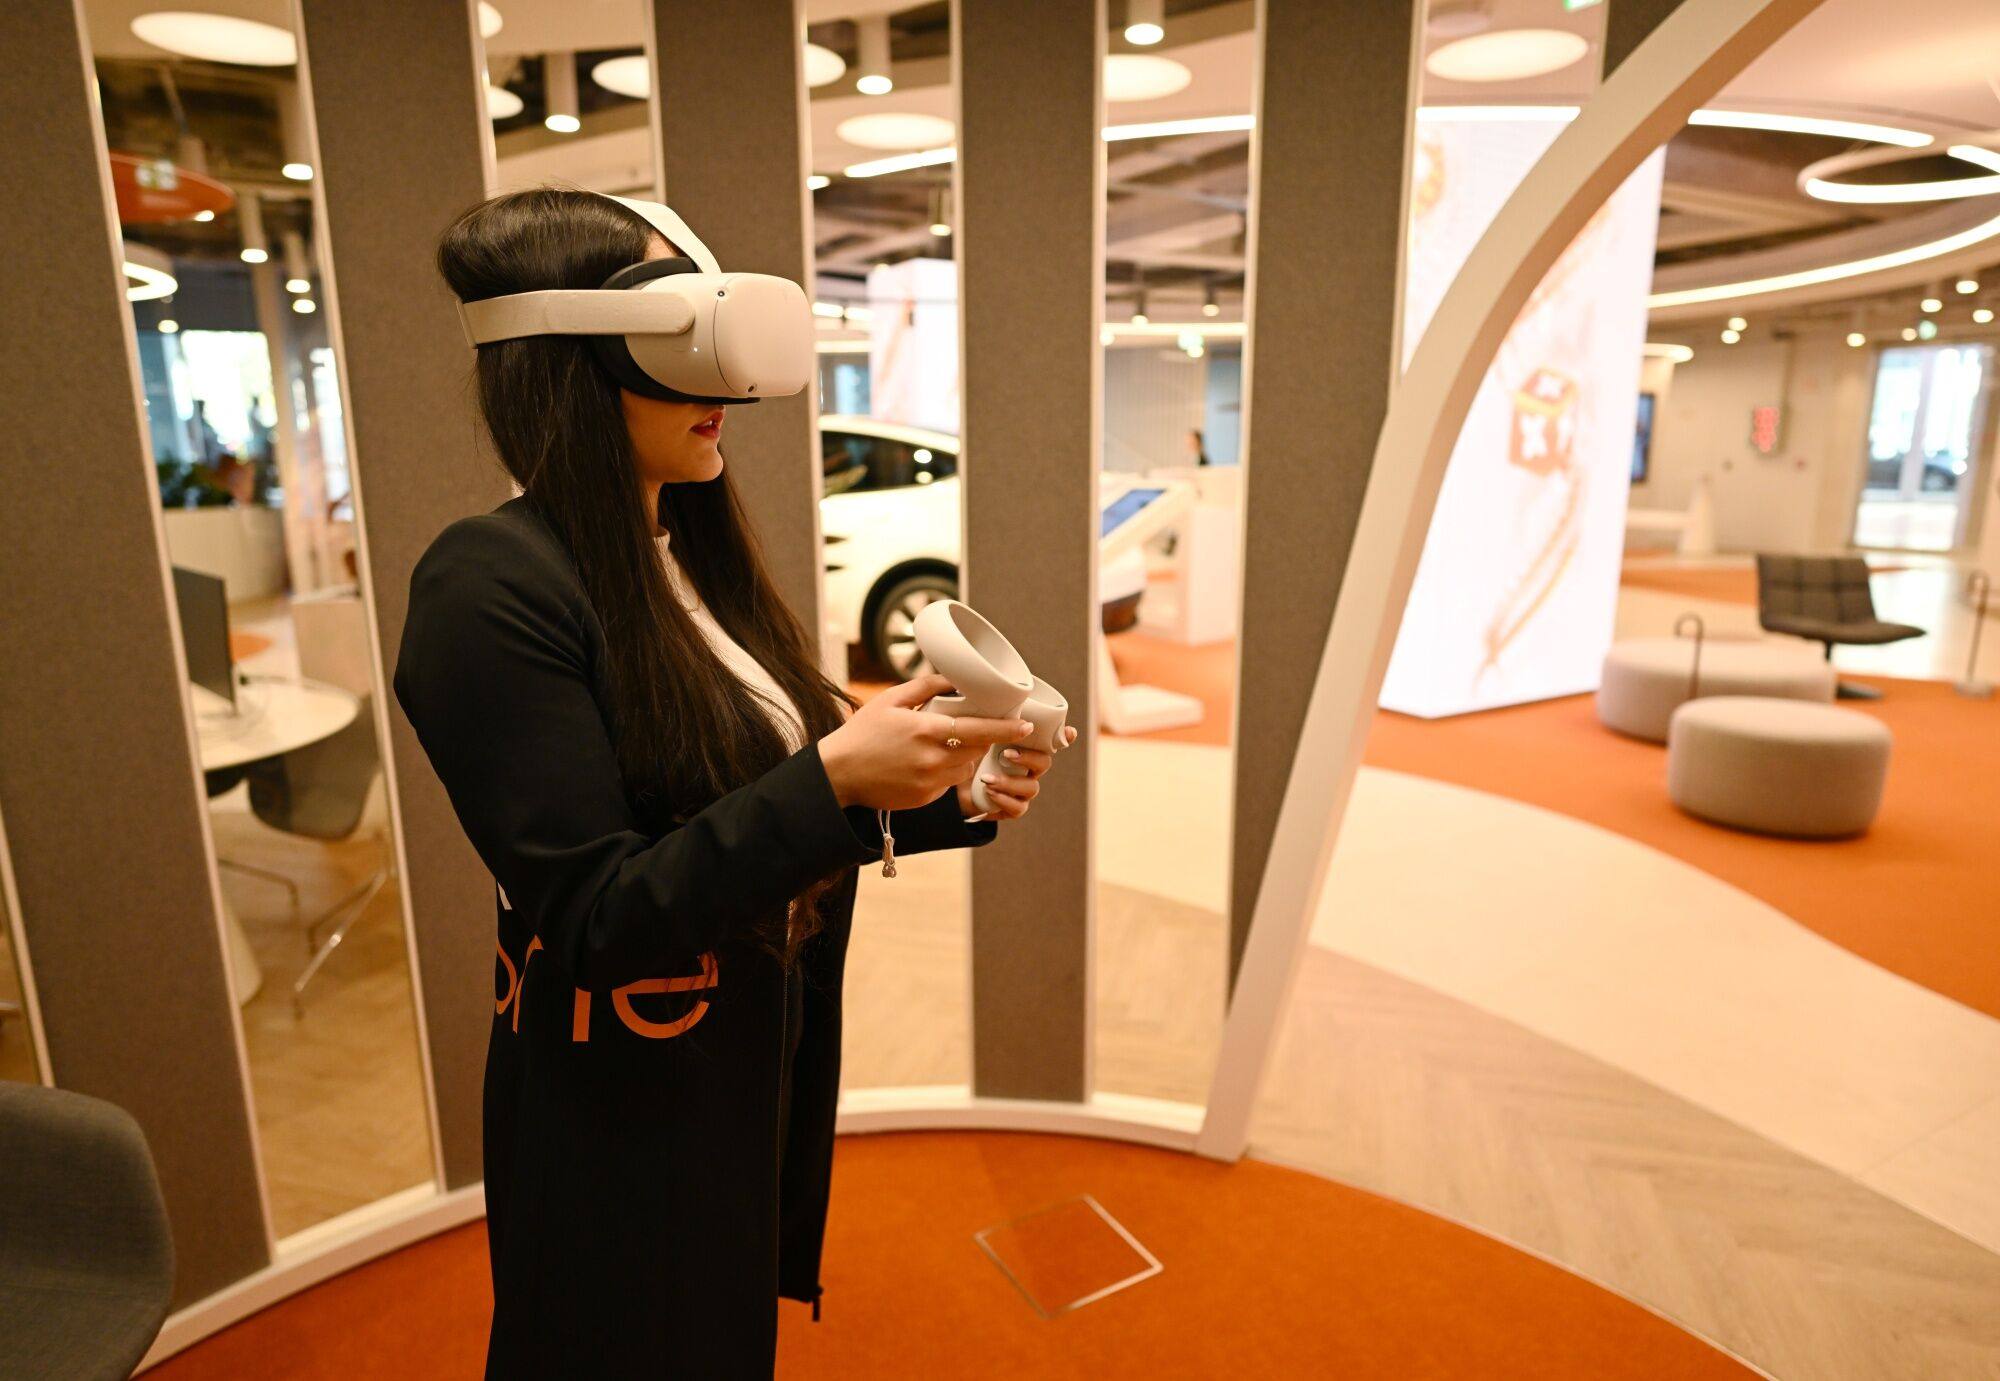 An employee wears a Meta Platforms Oculus Quest 2 virtual reality headset to demonstrate an immersive experience of BPI banking services inside the Banco BPI SA ‘All in One’ concept bank branch in Lisbon, Portugal, on April 17, 2023. Photo: Bloomberg